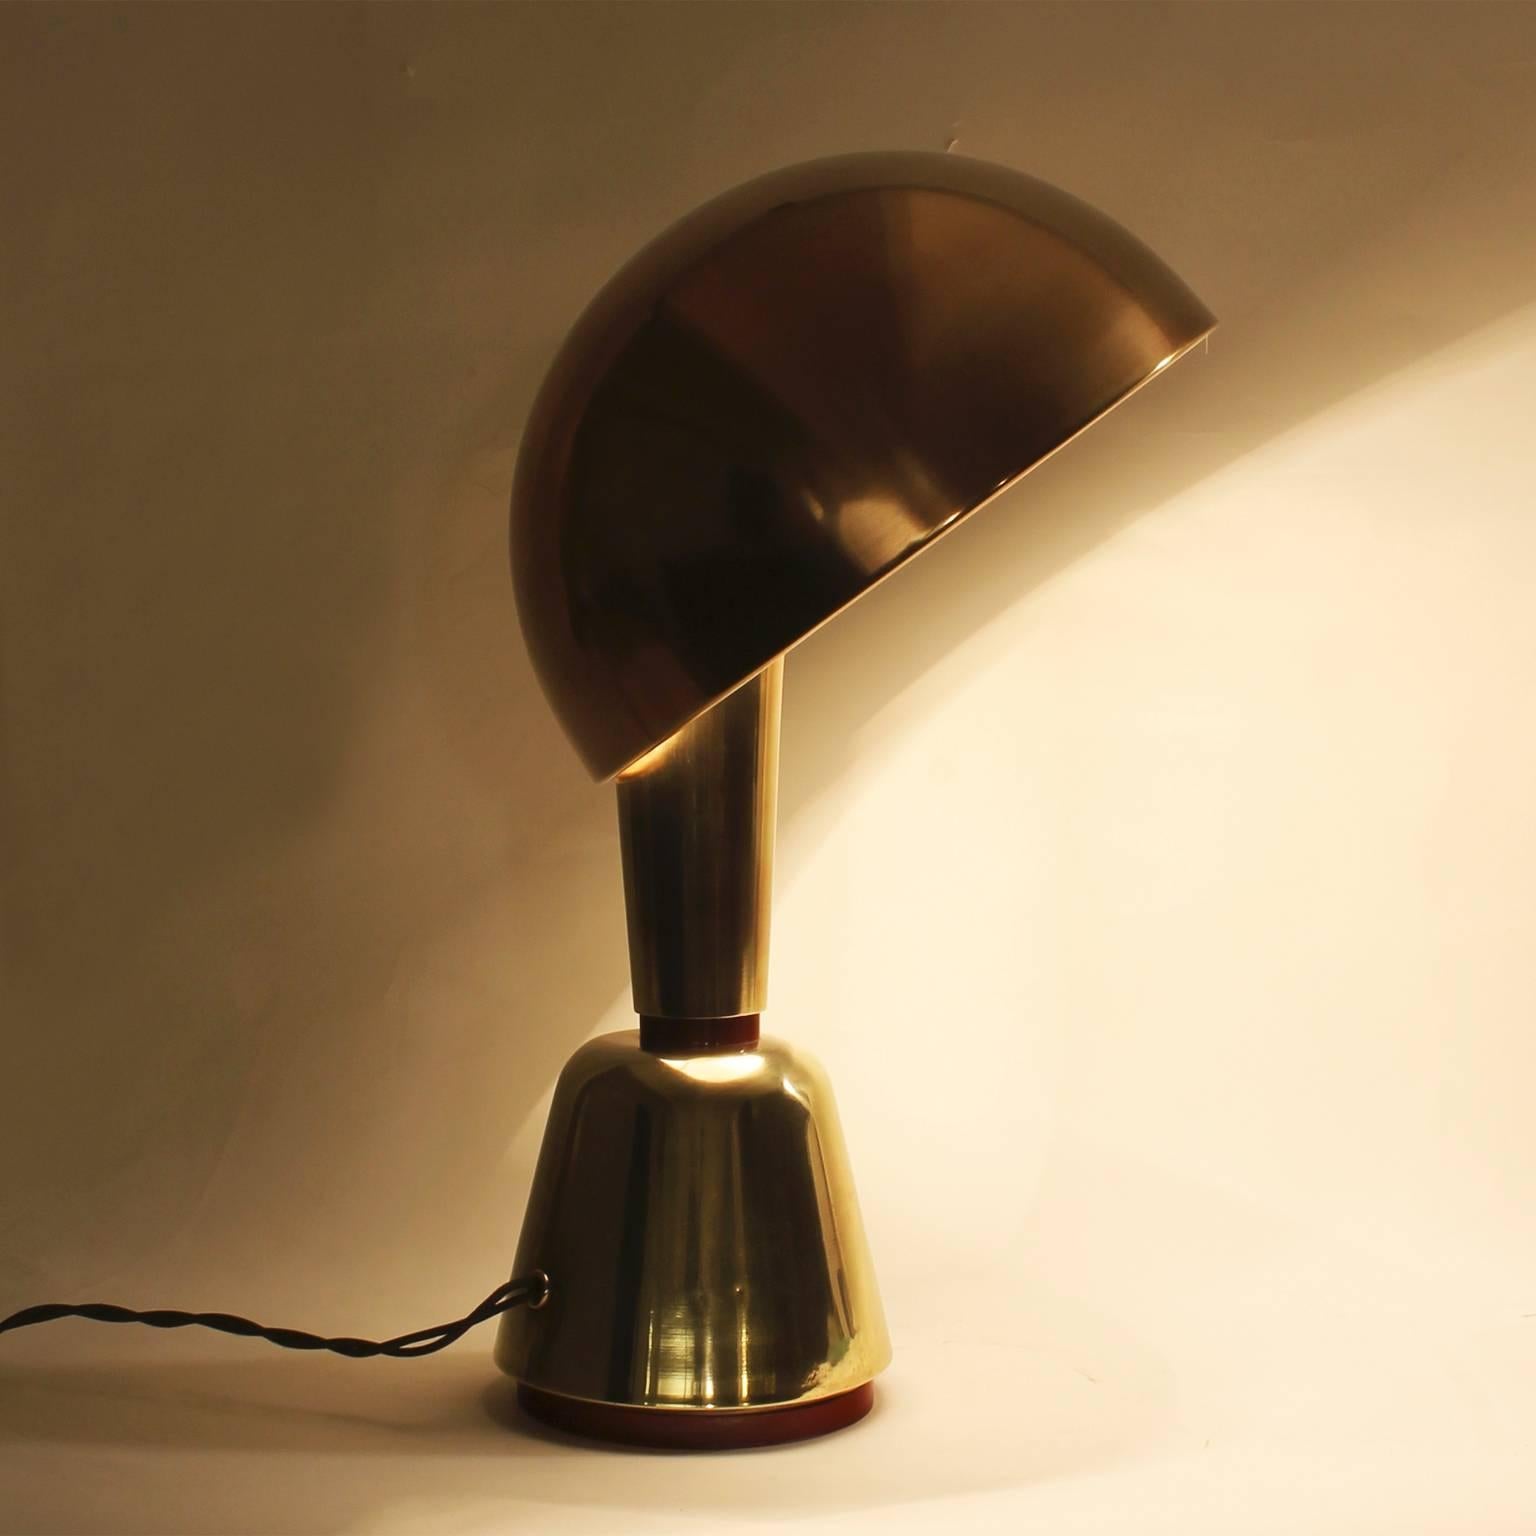 1920s Art Deco Desk Lamp by Magilux, brass, copper and bakelite - Italy 1